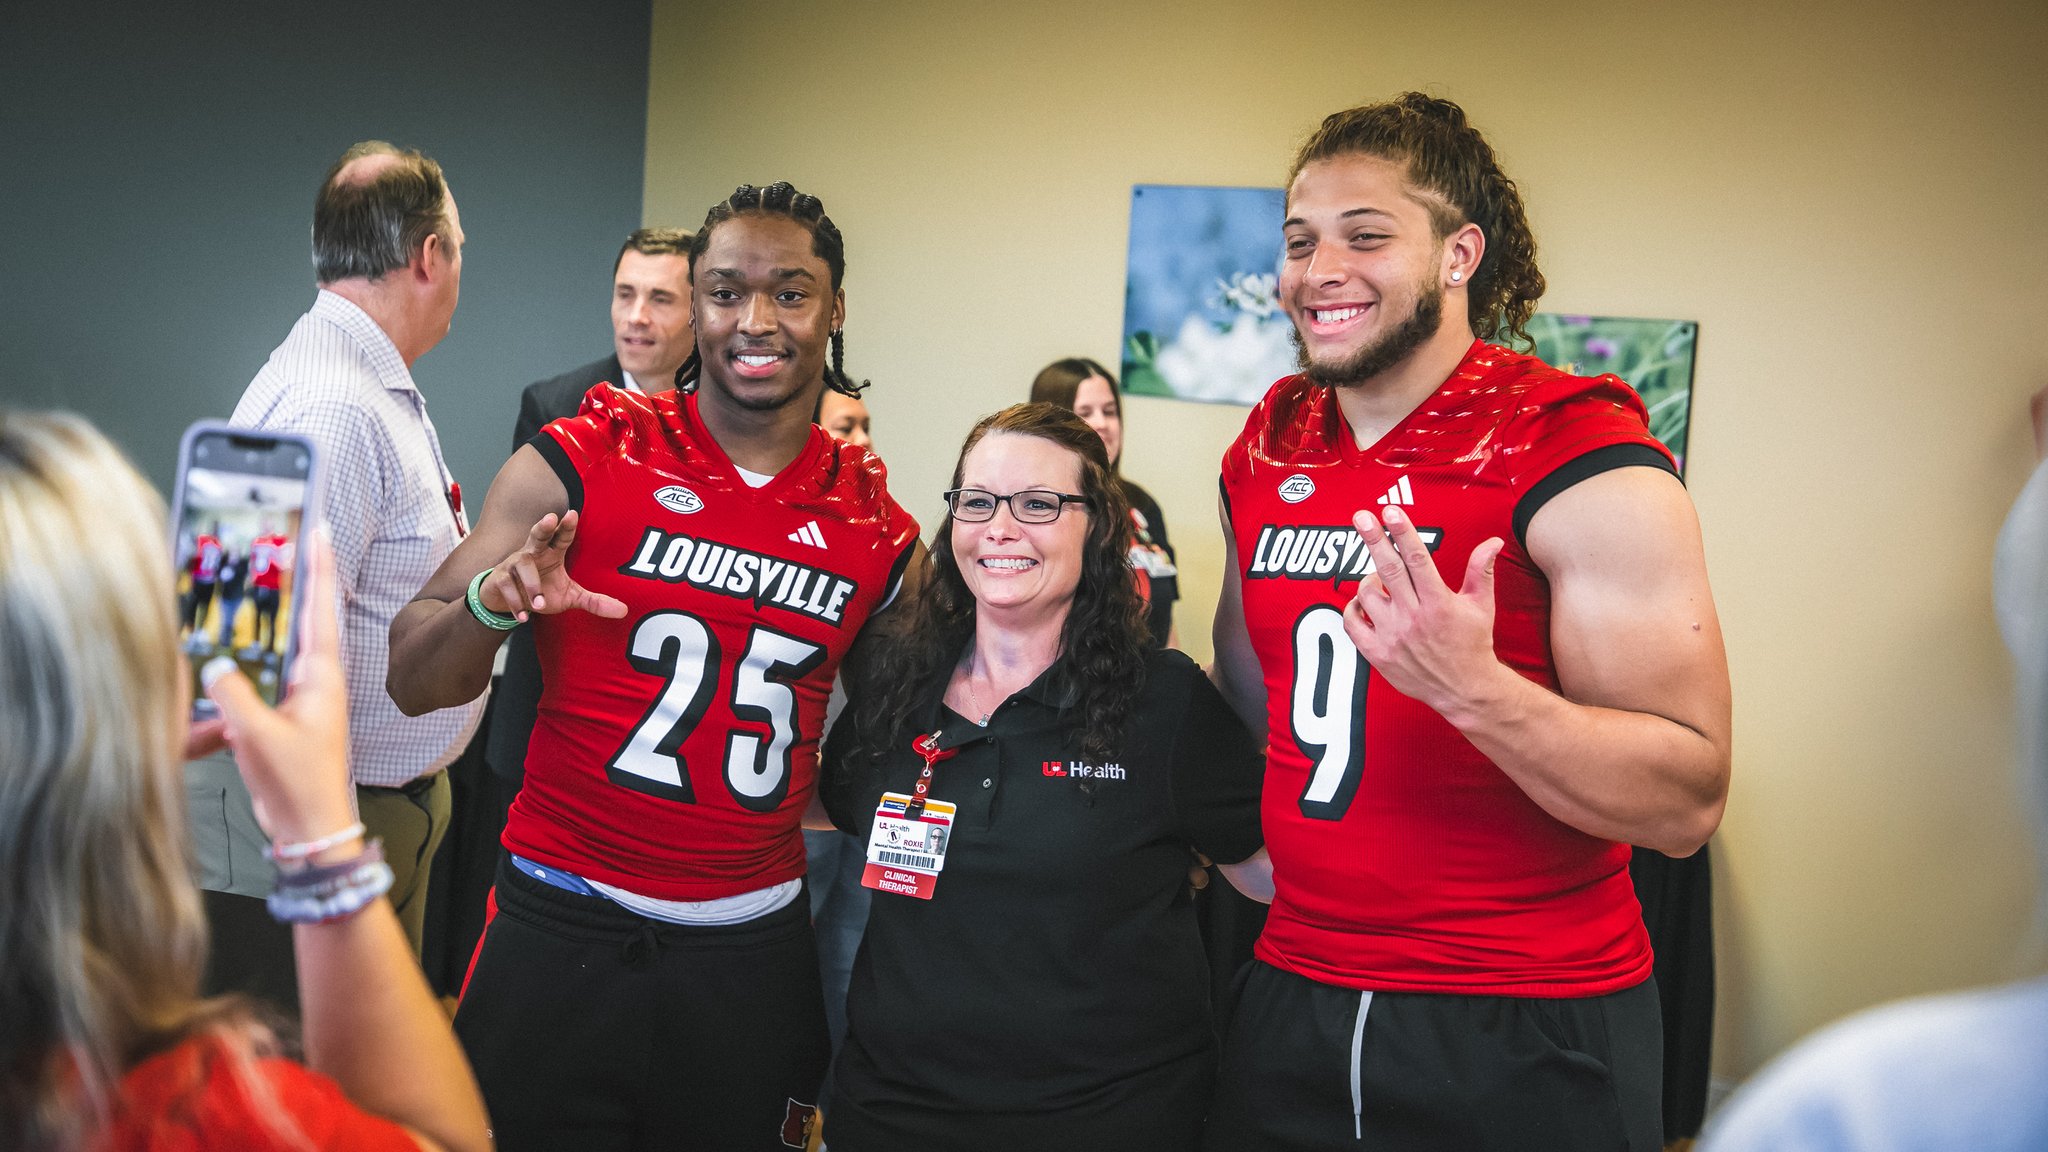 Louisville Football on X: Enjoyed visiting with the patients and